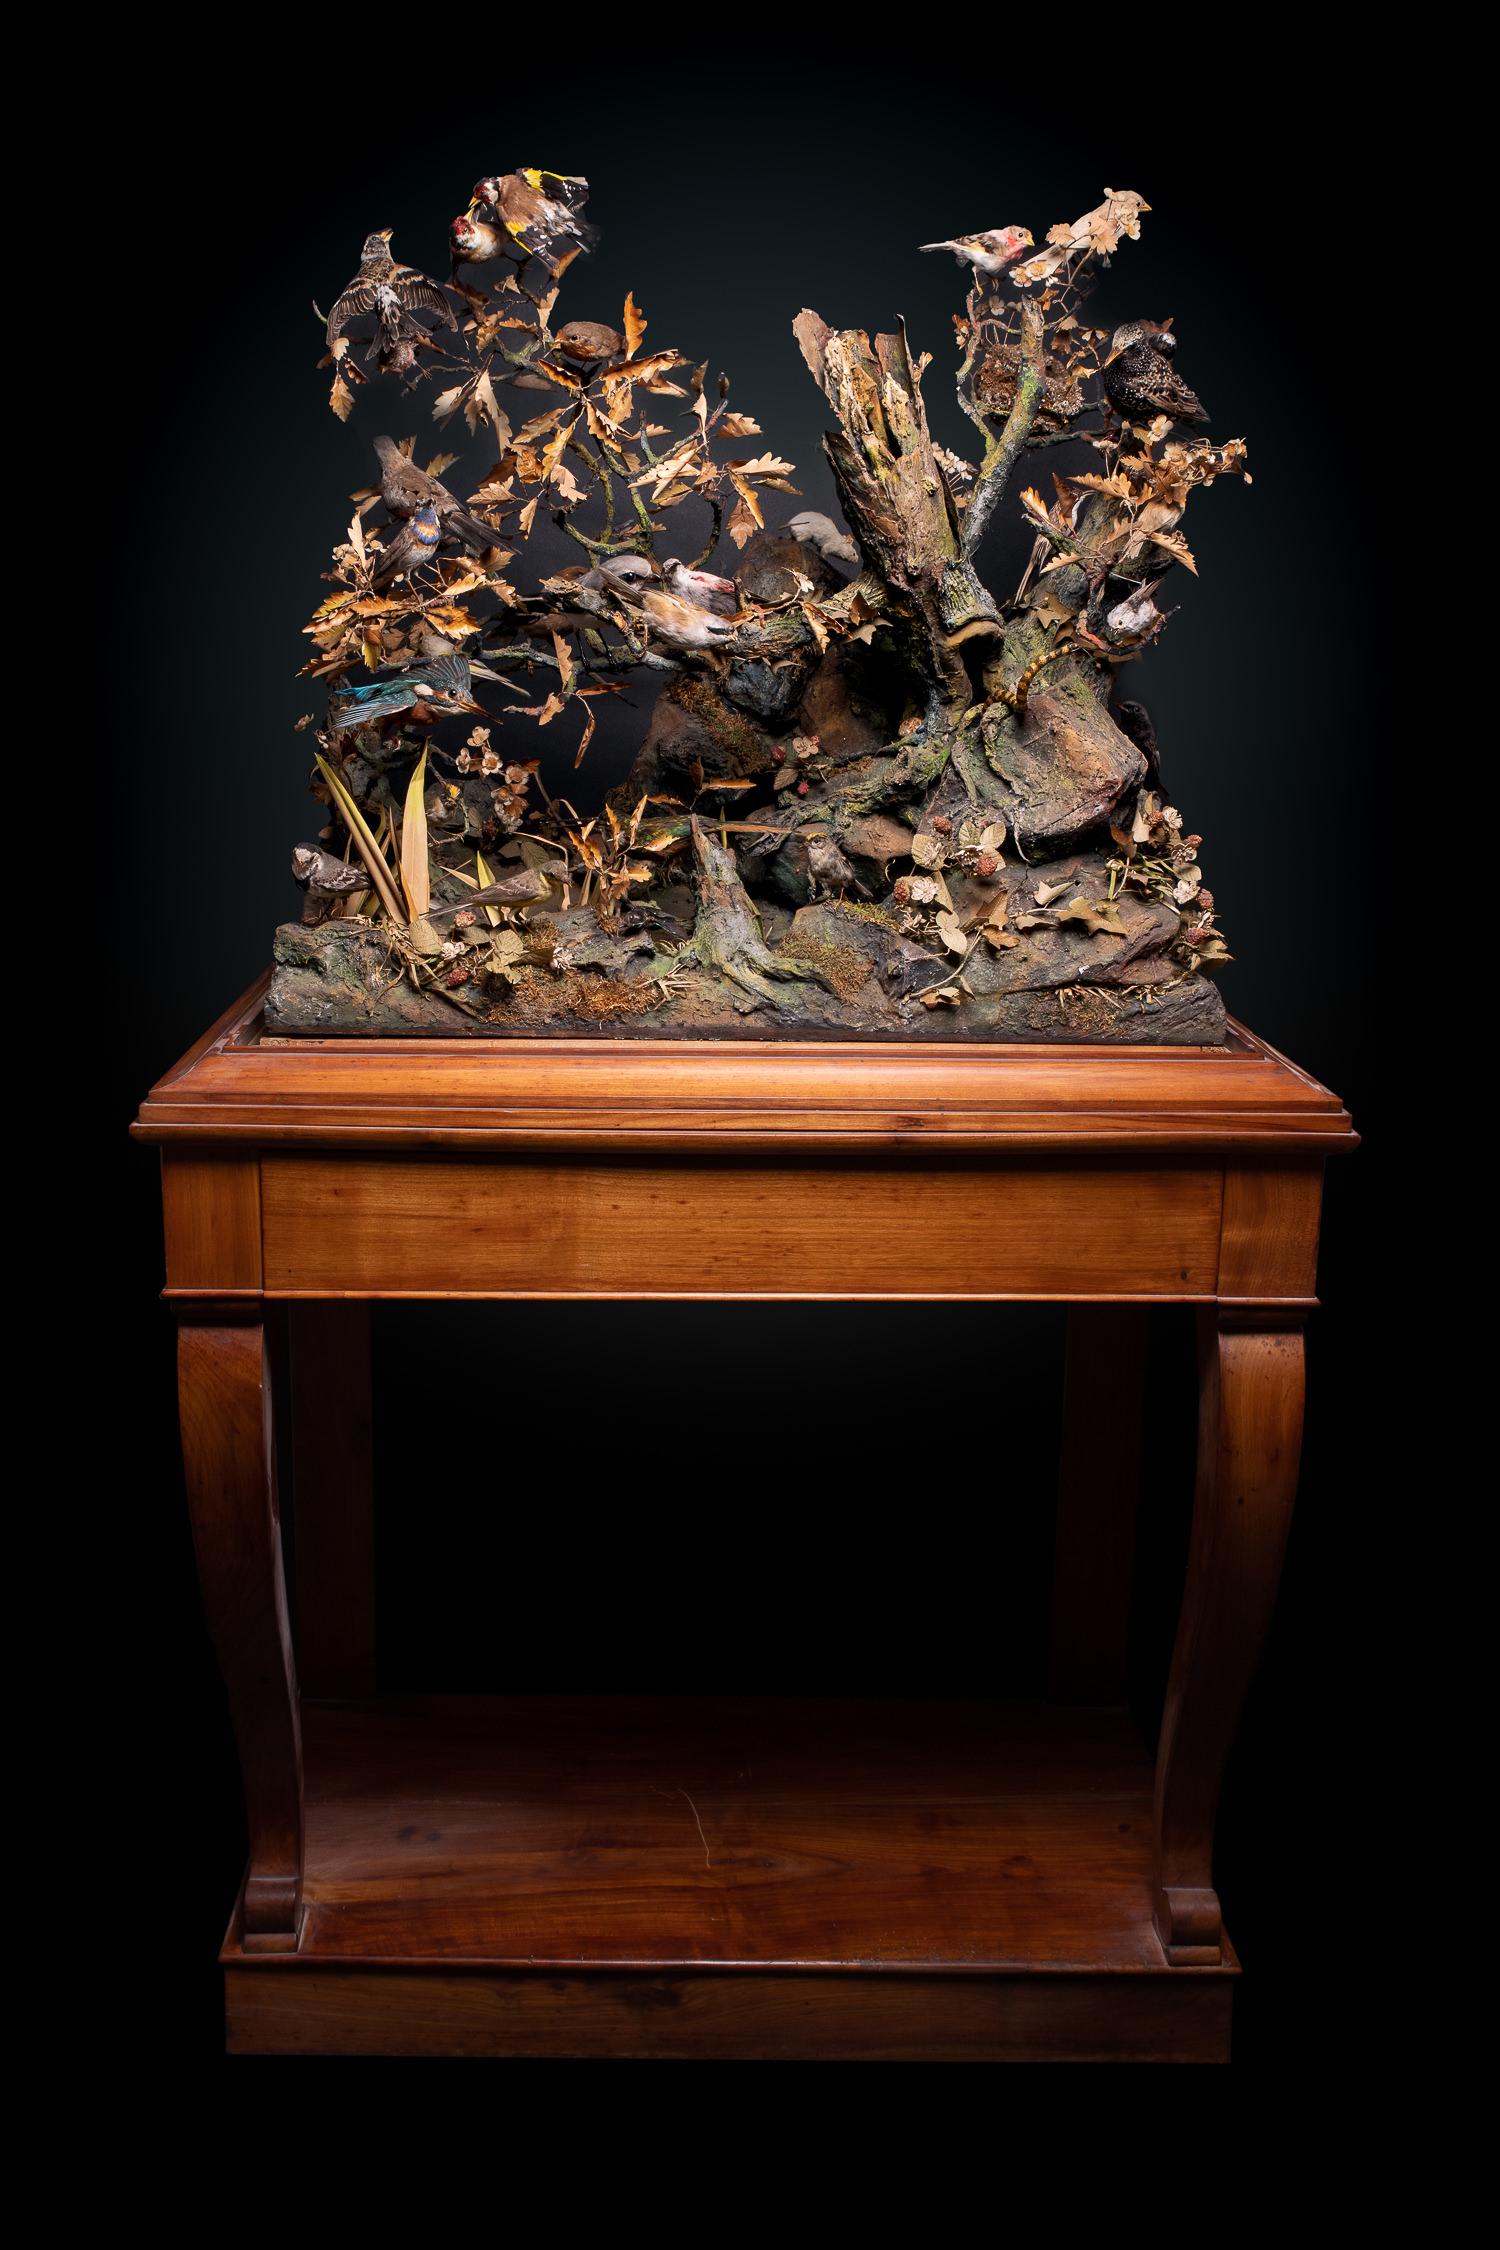 A pair of Antique 19th C French Dioramas of taxidermy birds and animals, variously perched on branches and groundwork set within their original ebonised display cabinets. Taxidermy dated before 1947 commercialised in accordance with rule n°338/97 CE